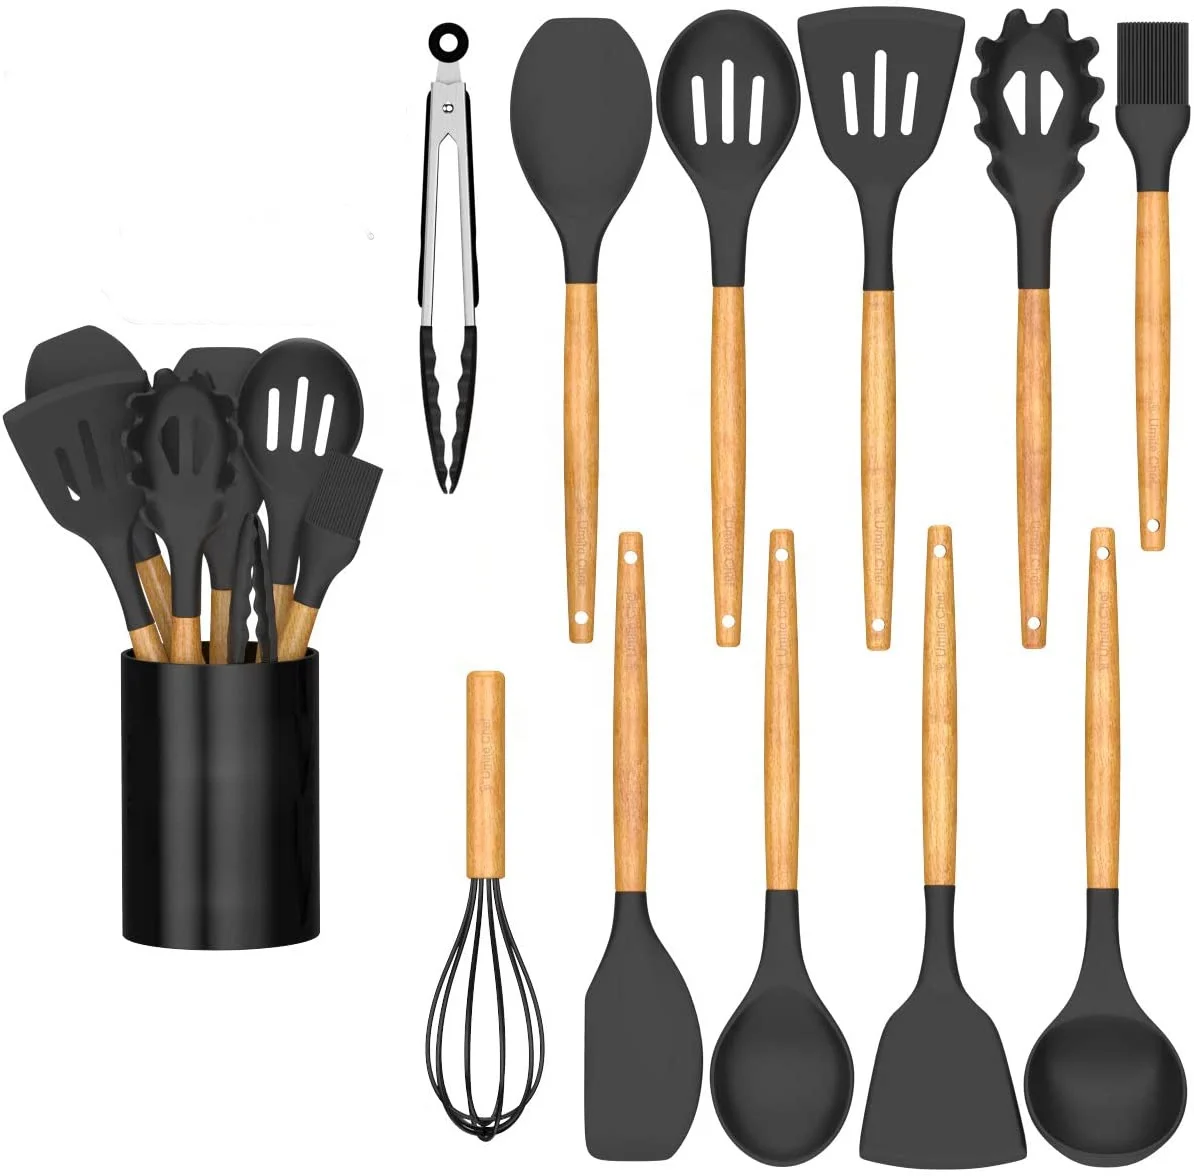 

Silicone Cooking Utensils Kitchen Utensil Set Tools with Wood Handles, Black